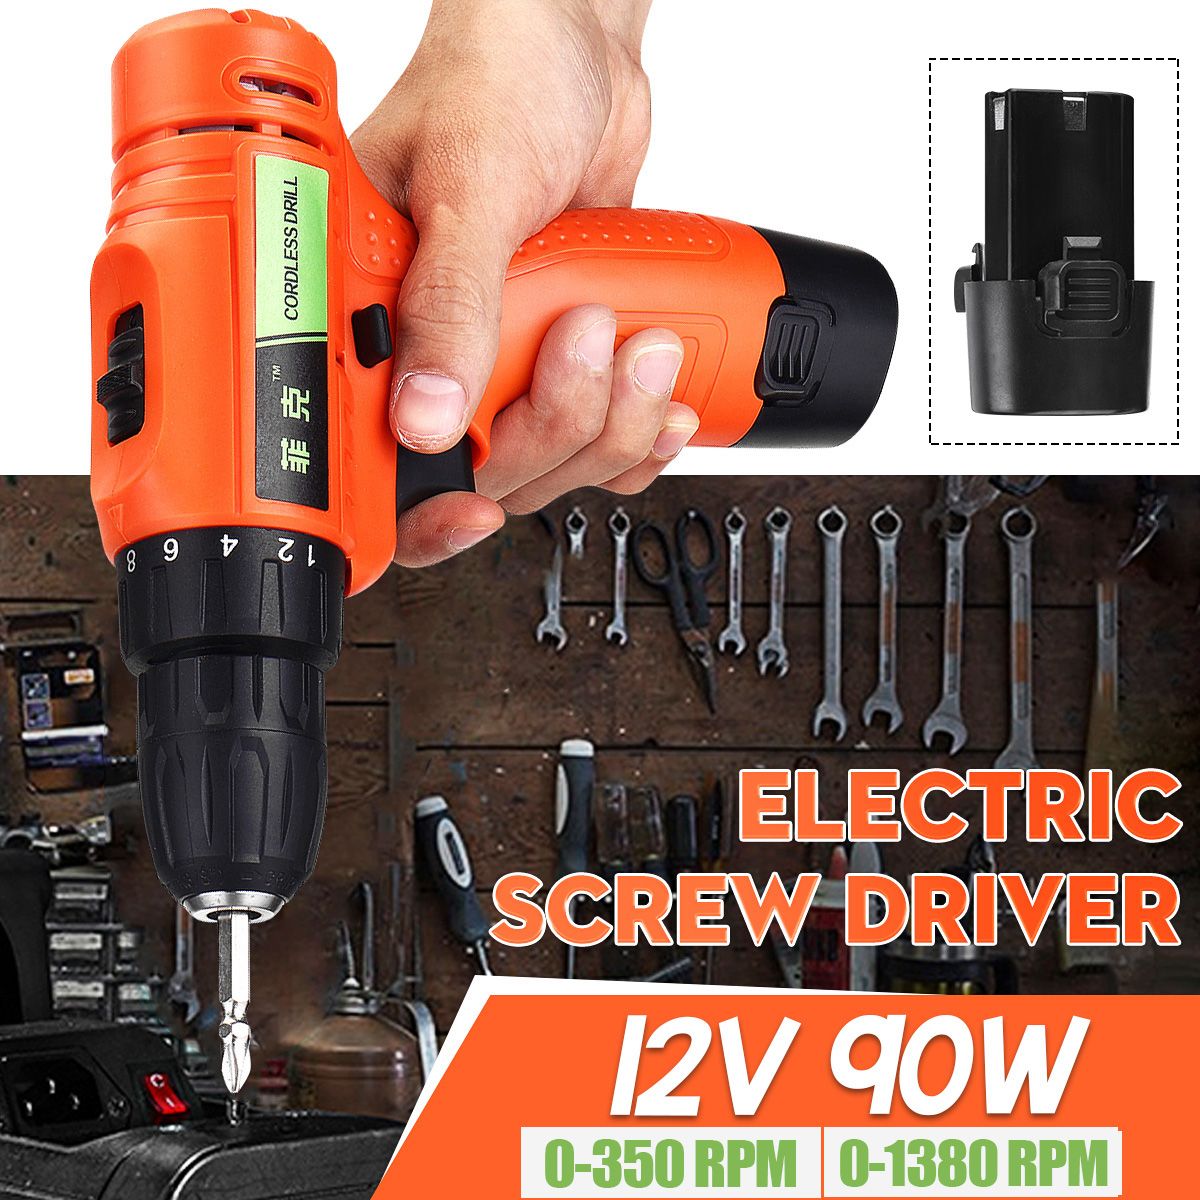 Dual-Speed-Rechargable-Electric-Scredriver-Drill-Mini-Power-Drill-Screw-Driver-Li-ion-Battery-Househ-1659814